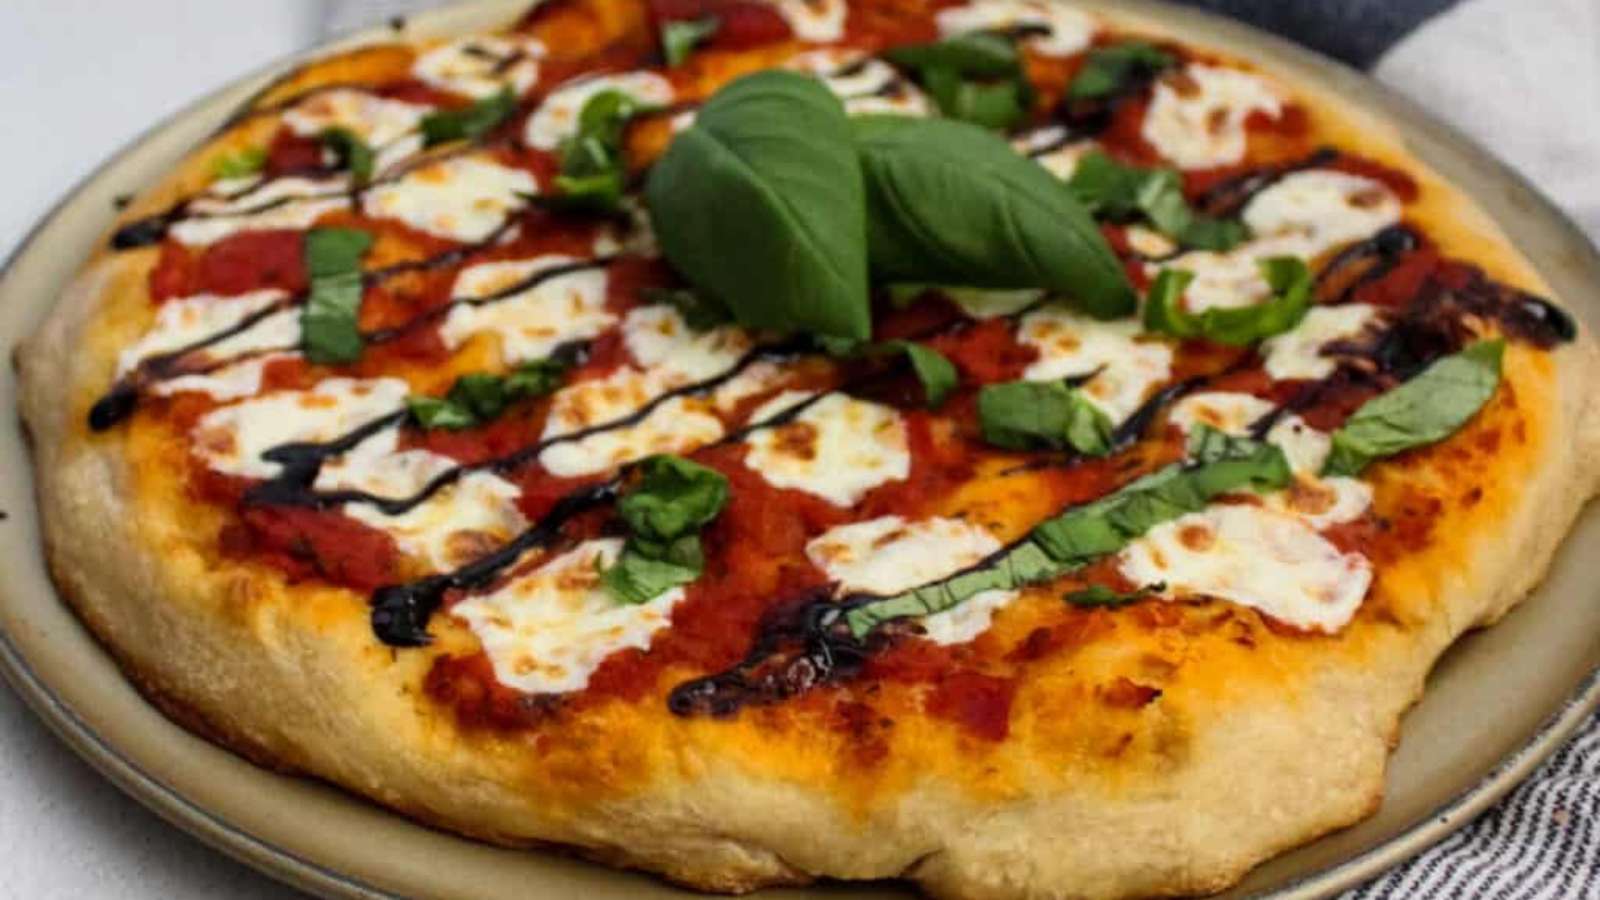 A pizza with sauce and basil on a plate.